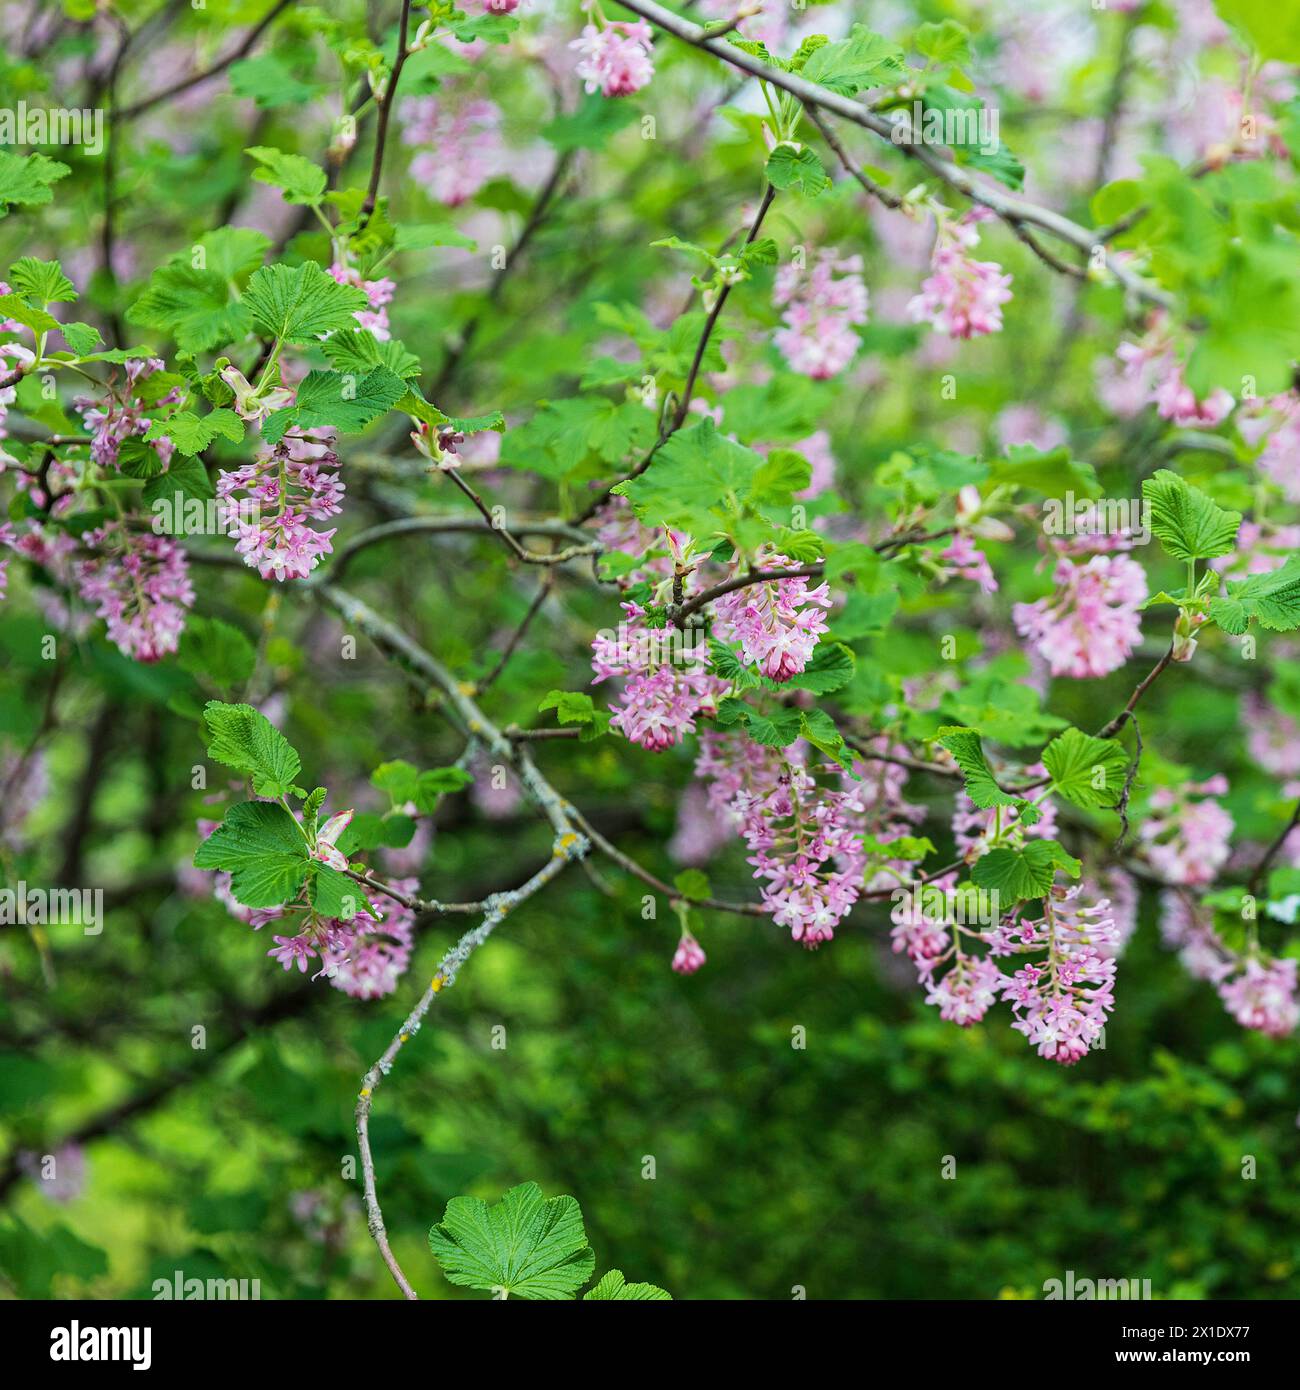 Ribes nevadense (sometimes spelled R. nevadaense) is a species of currant known by the common names Sierra currant and mountain pink currant. Stock Photo